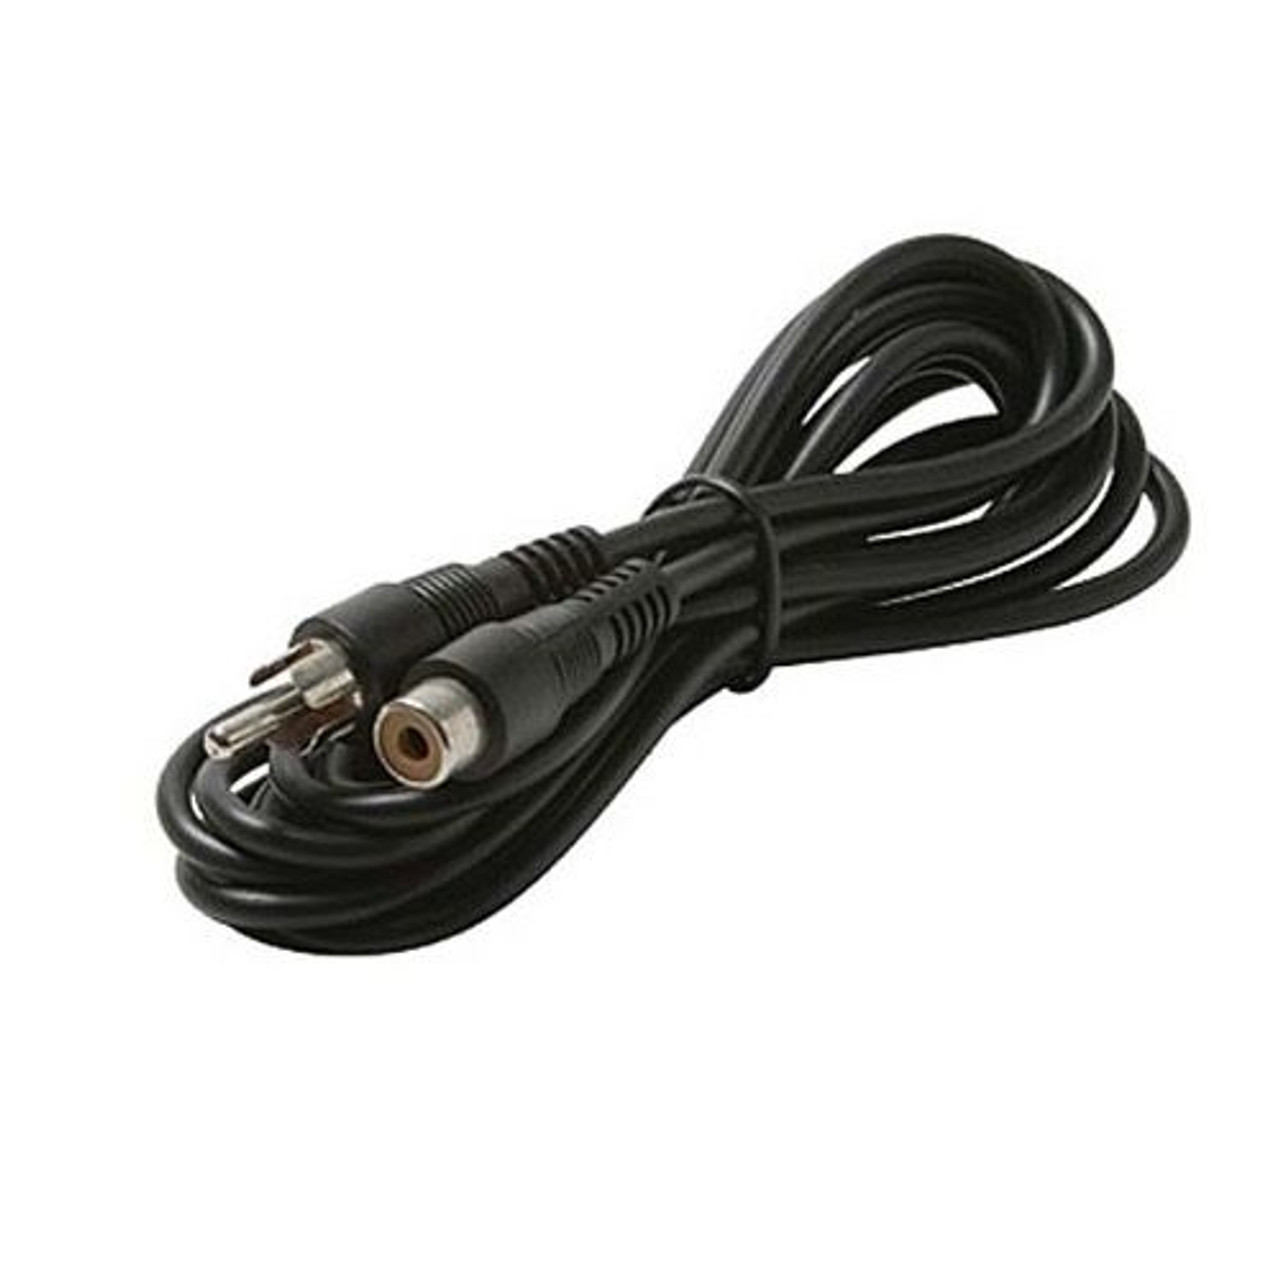 Steren 255-105 10' FT Audio RCA Female Jack to RCA Male Plug Extension Cable Cord Black Nickle Plated Connector Patch 95% Wound Copper Shielded Fully Moulded Push-On 26 AWG Cable, Part # 255105